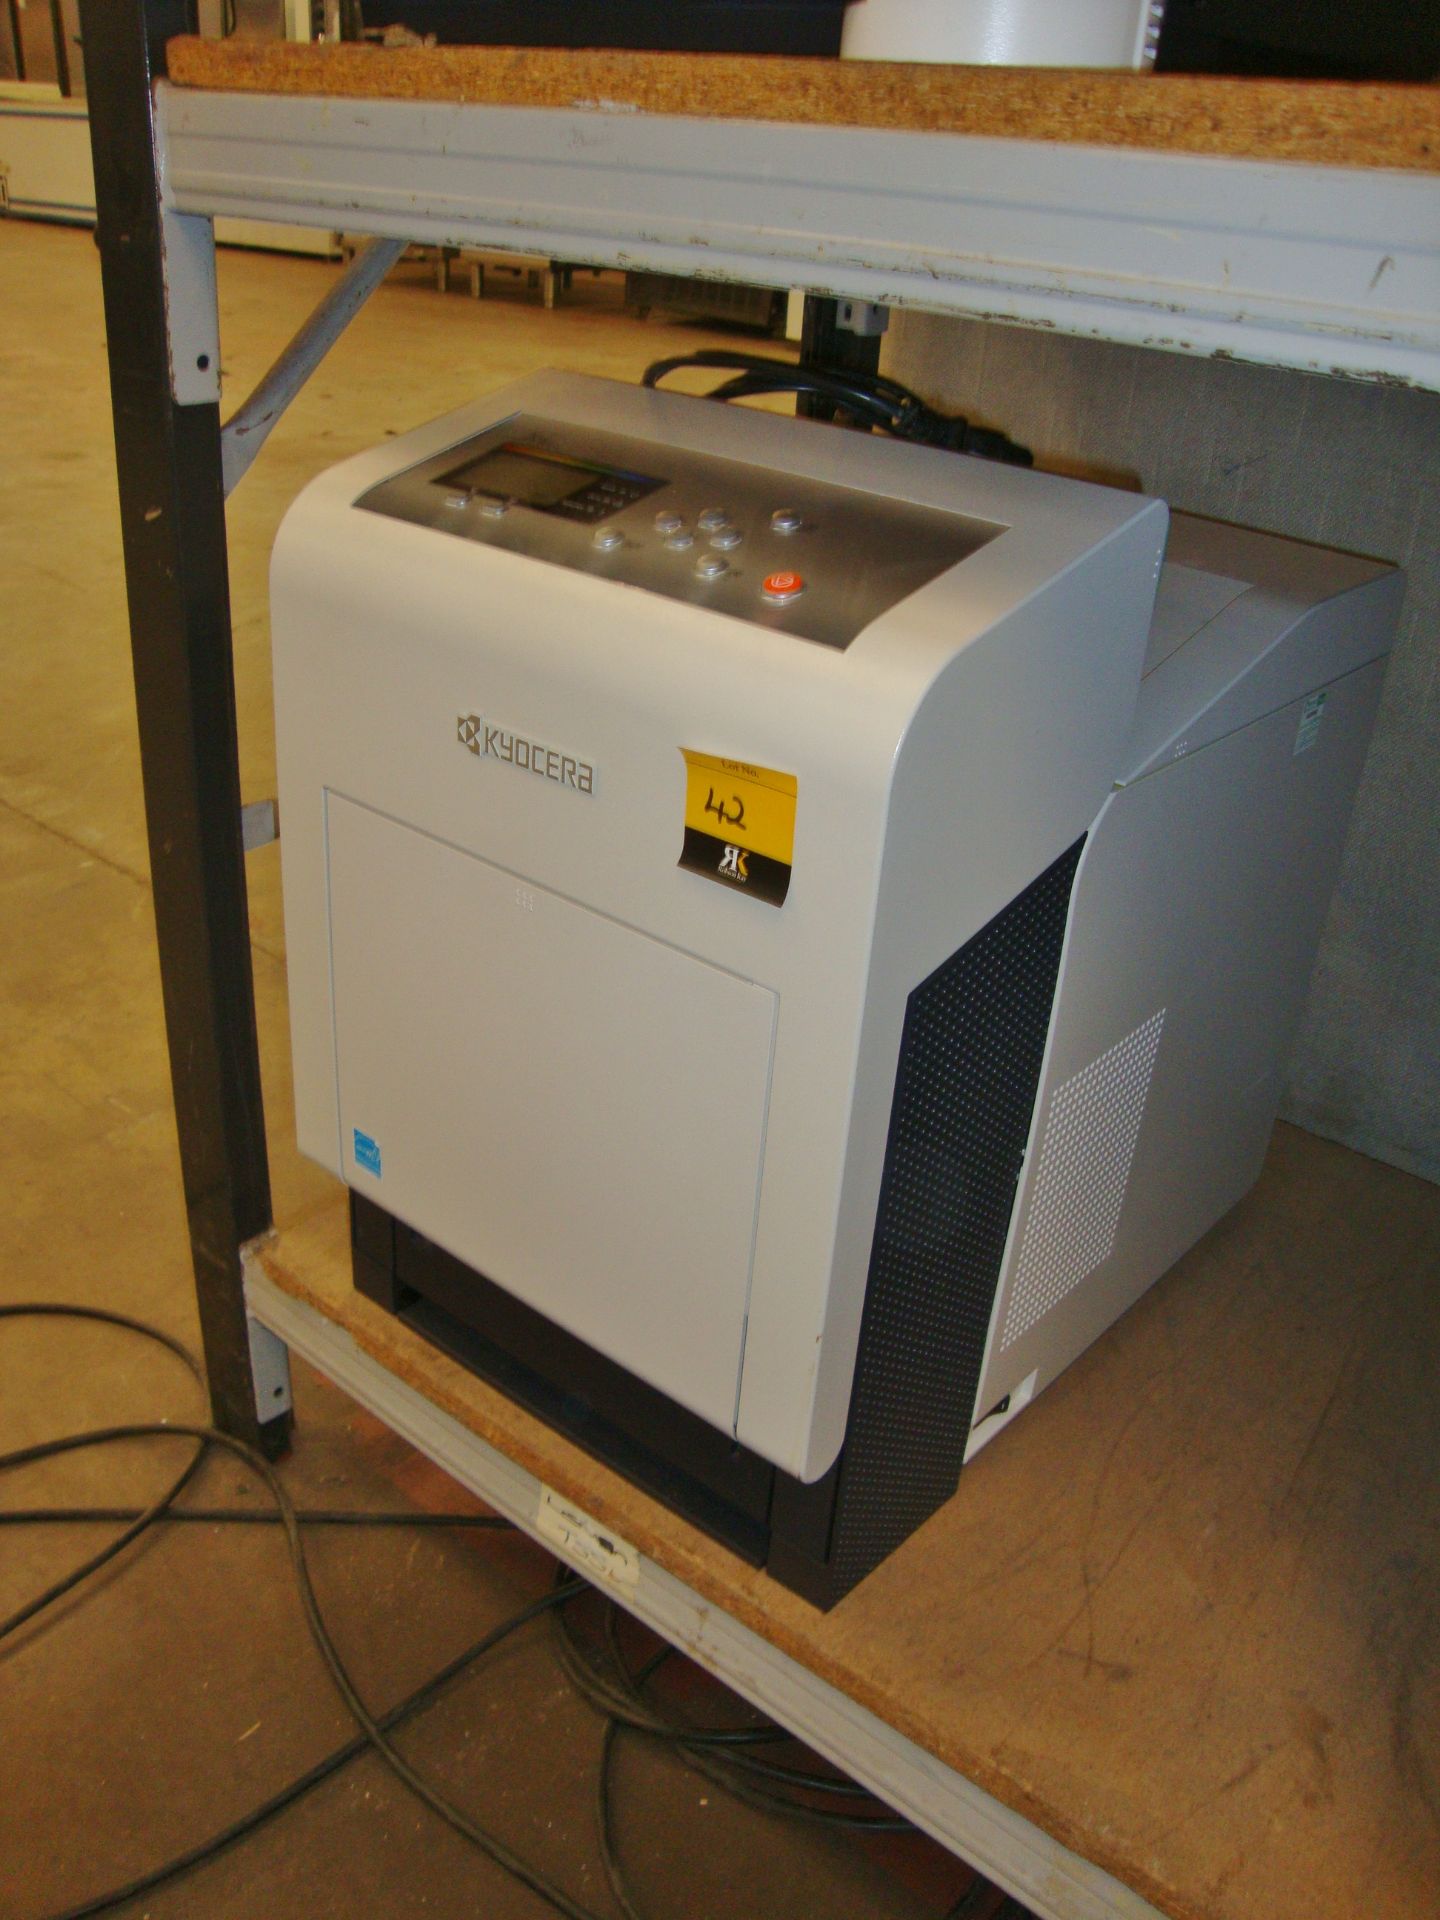 Kyocera model FS-C5400DN 35 page per minute colour laser printer. Up to 9,600 DPI printing quality - Image 3 of 5